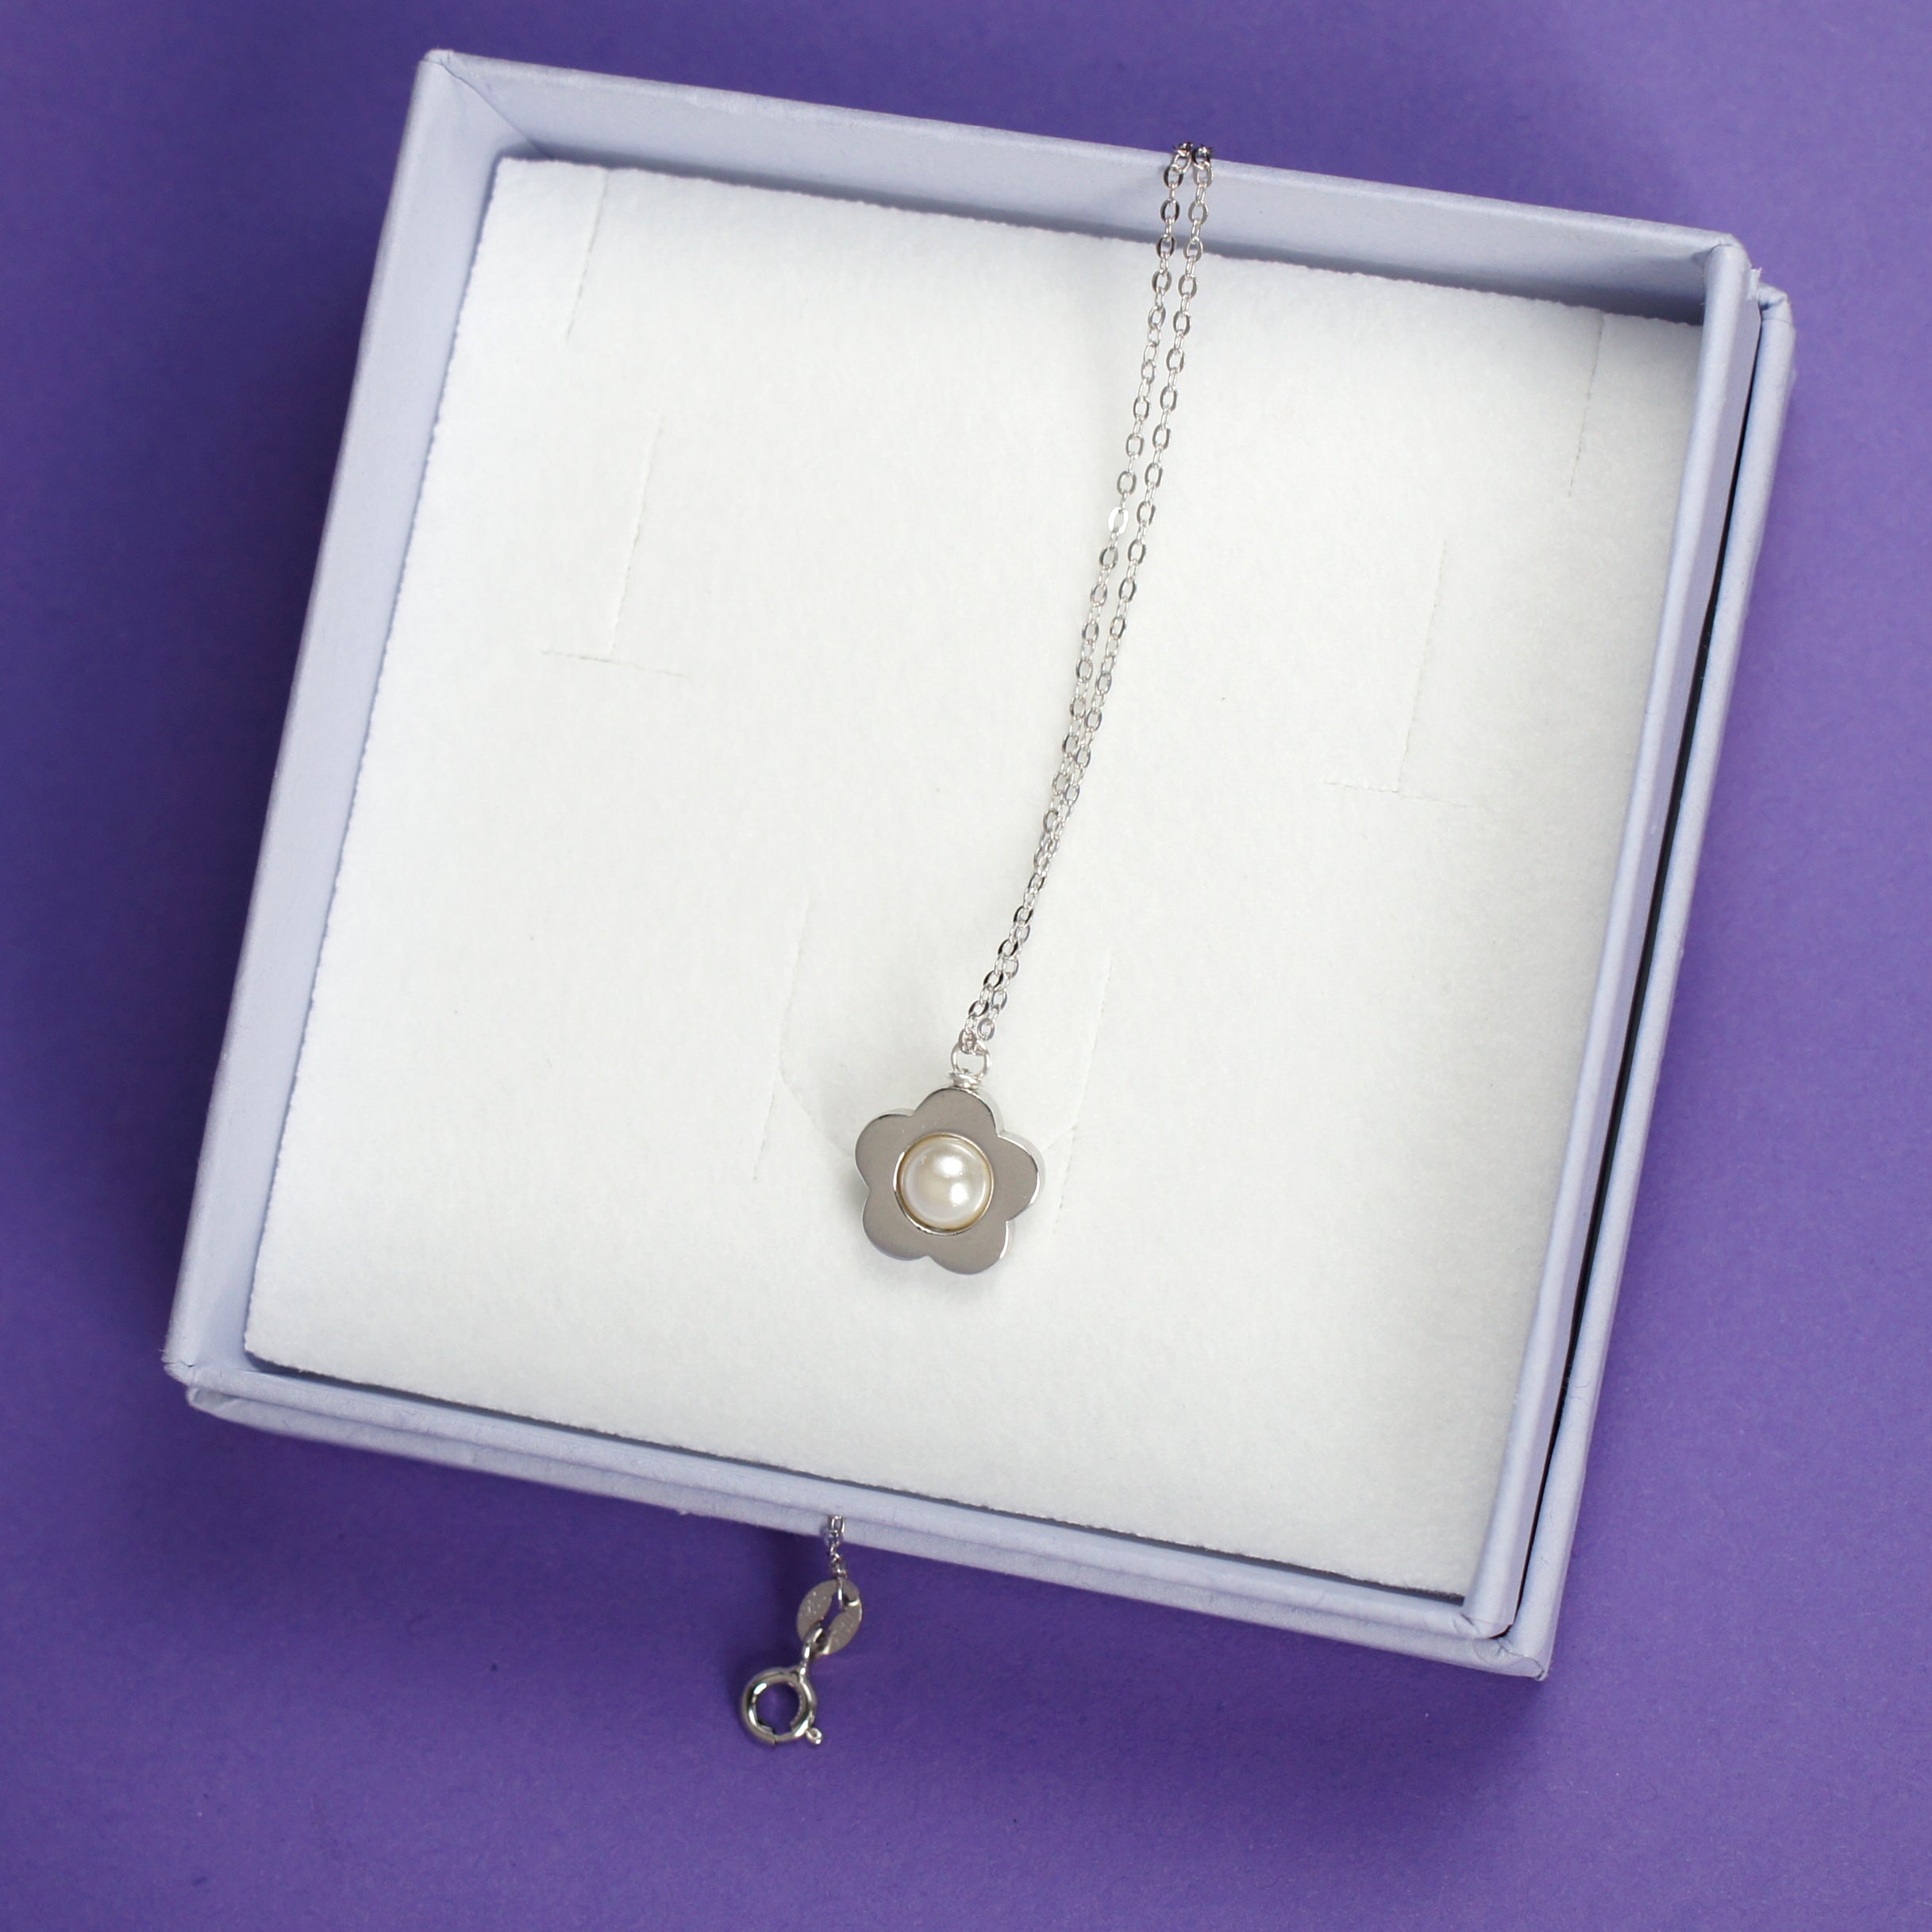 Flower Power Gold Vermeil/Sterling Silver Necklace with Flower and Pearl Pendant